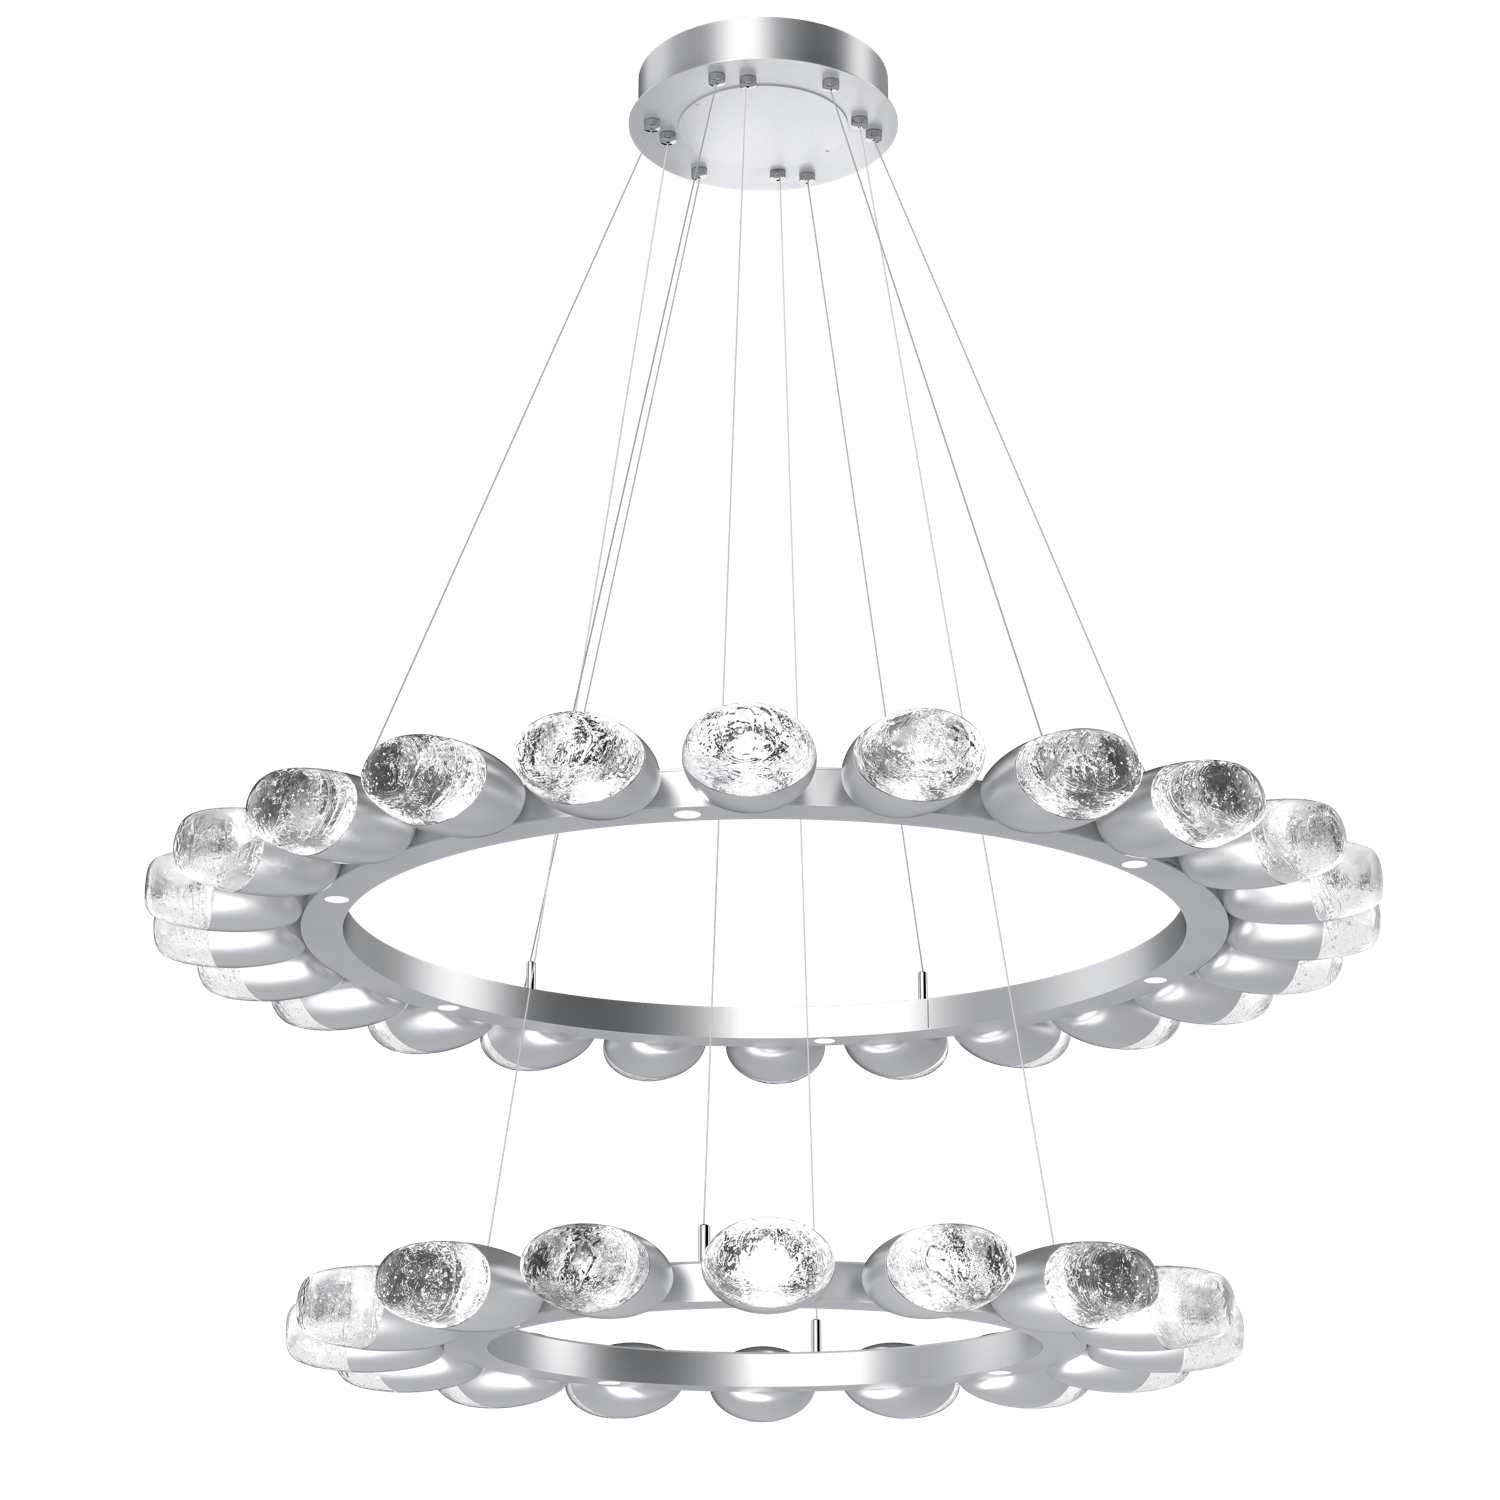 CHB0079-2T-CS-Hammerton-Studio-Pebble-48-inch-two-tier-radial-ring-chandelier-with-classic-silver-finish-and-clear-cast-glass-shades-and-LED-lamping